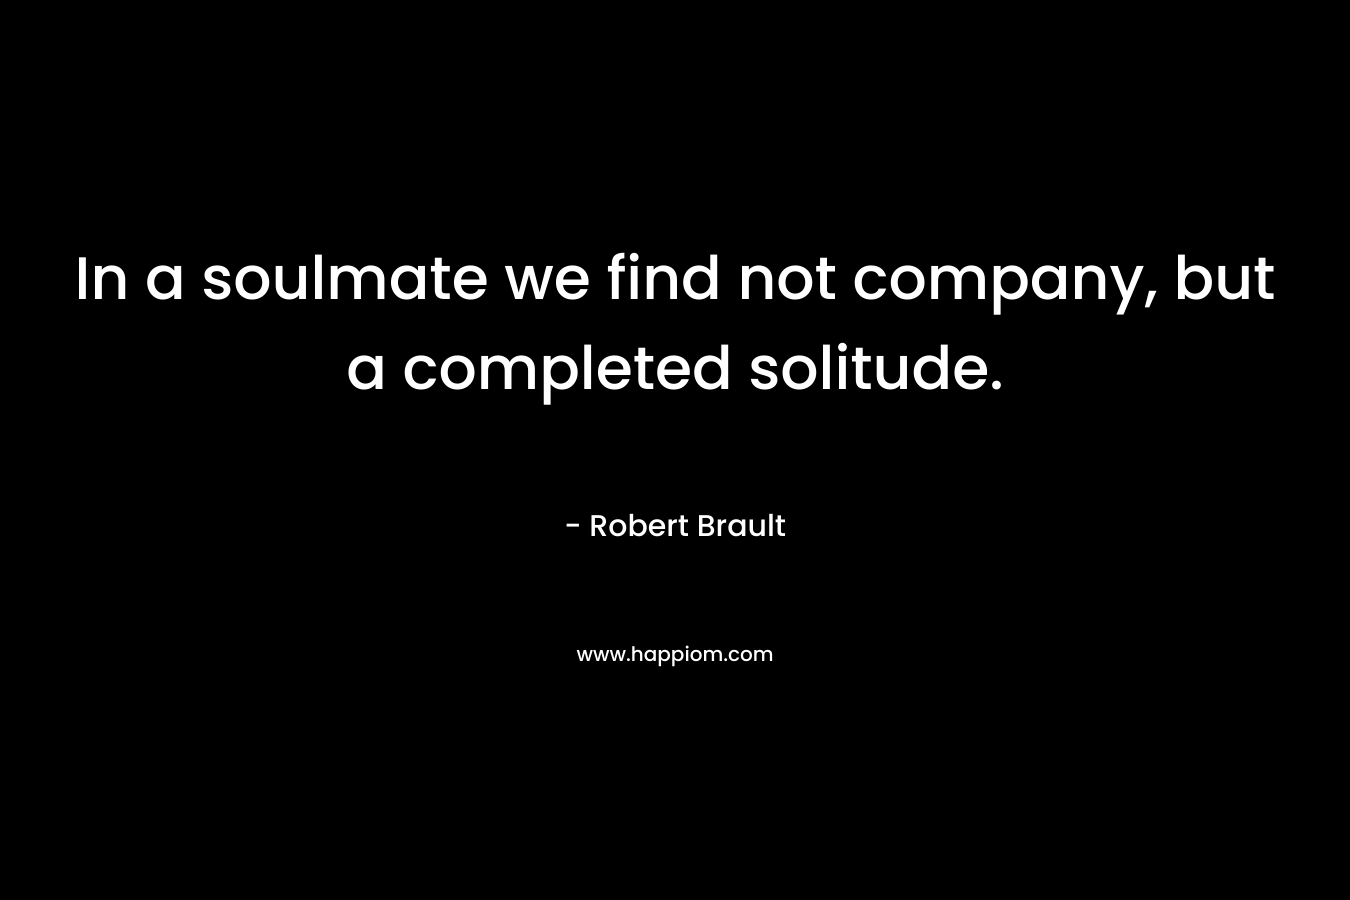 In a soulmate we find not company, but a completed solitude.